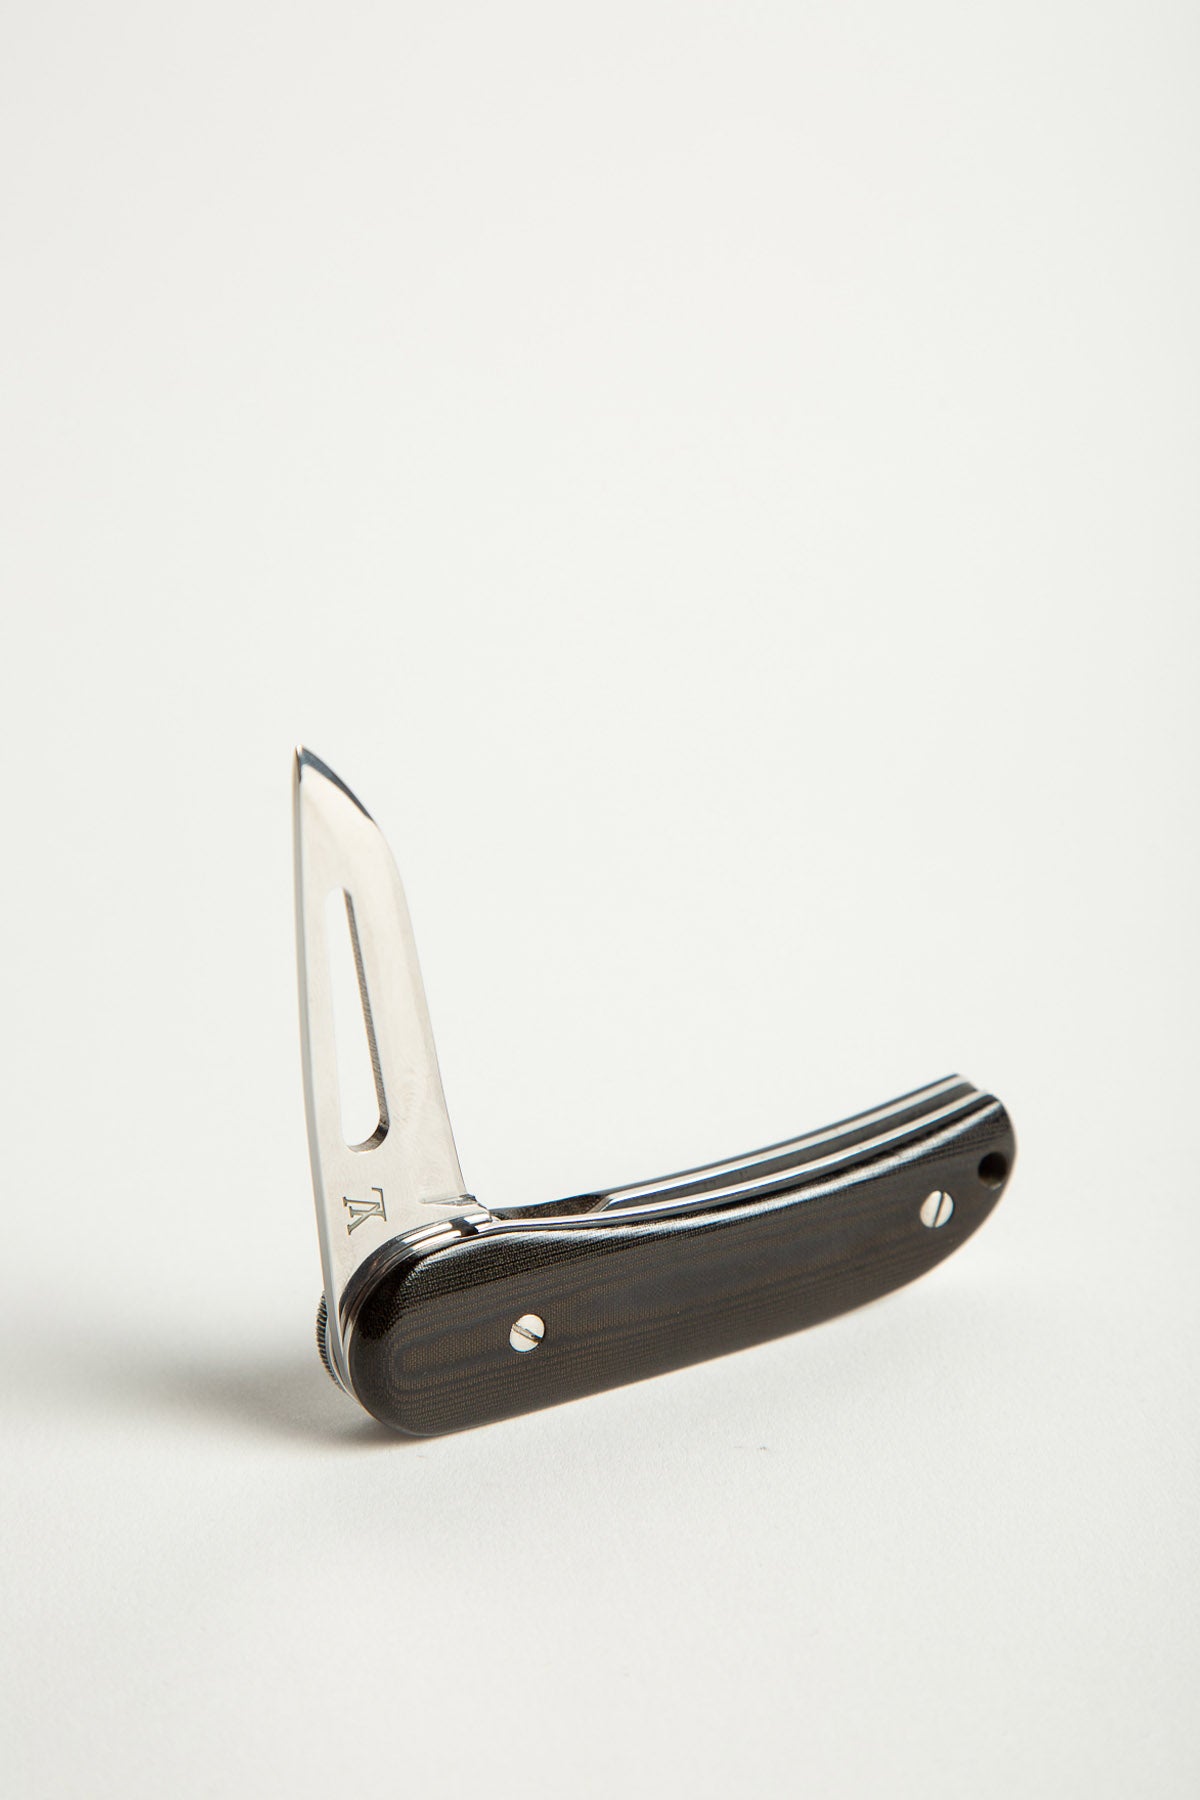 LOUIS VUITTON | 1995 AMERICA'S CUP POCKET KNIFE